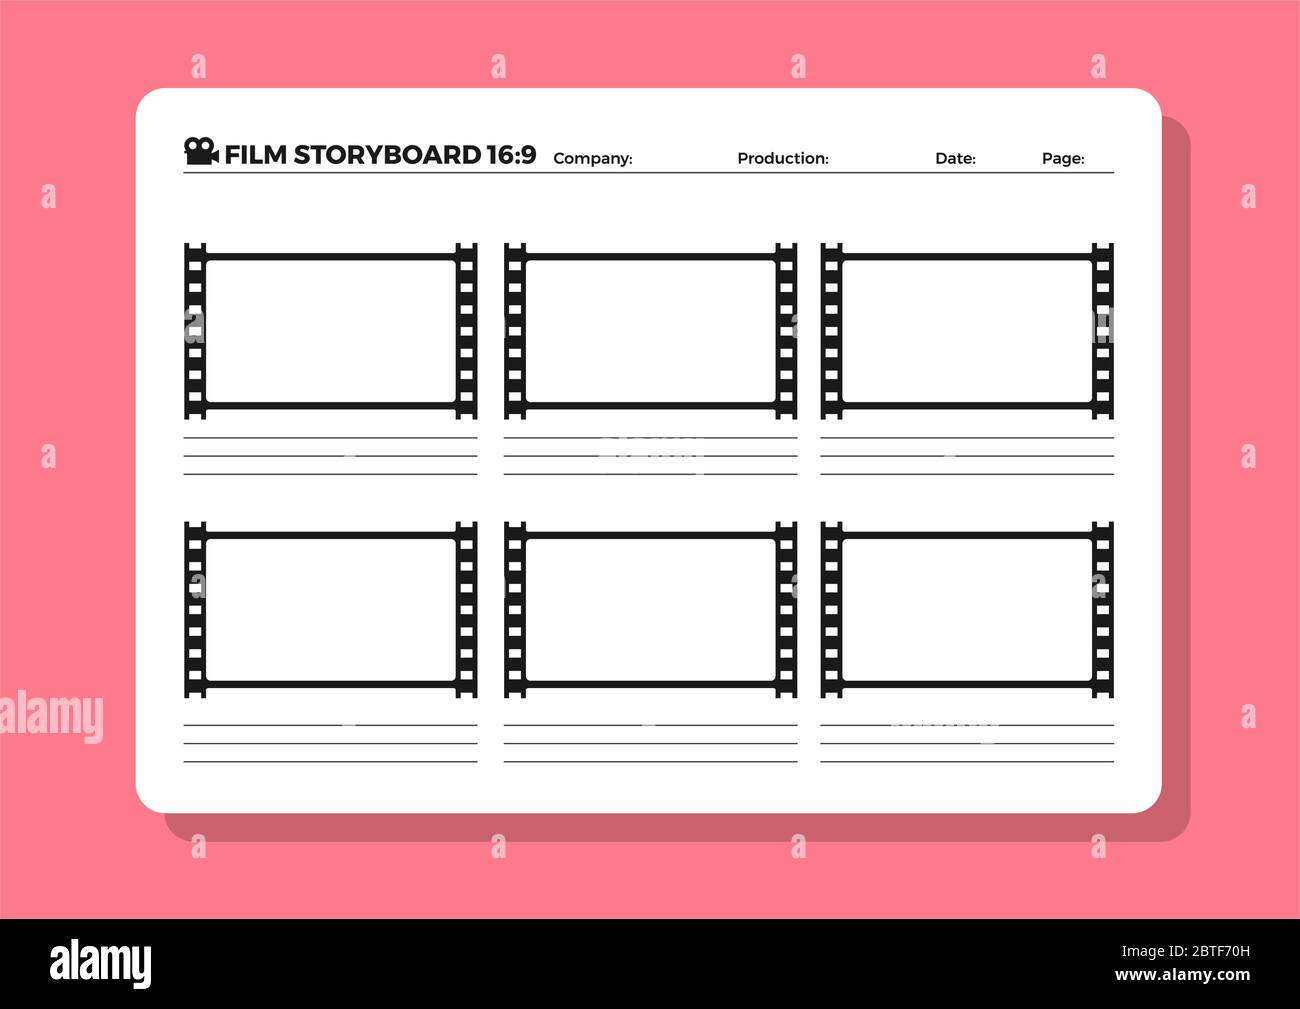 infographic storyboard template